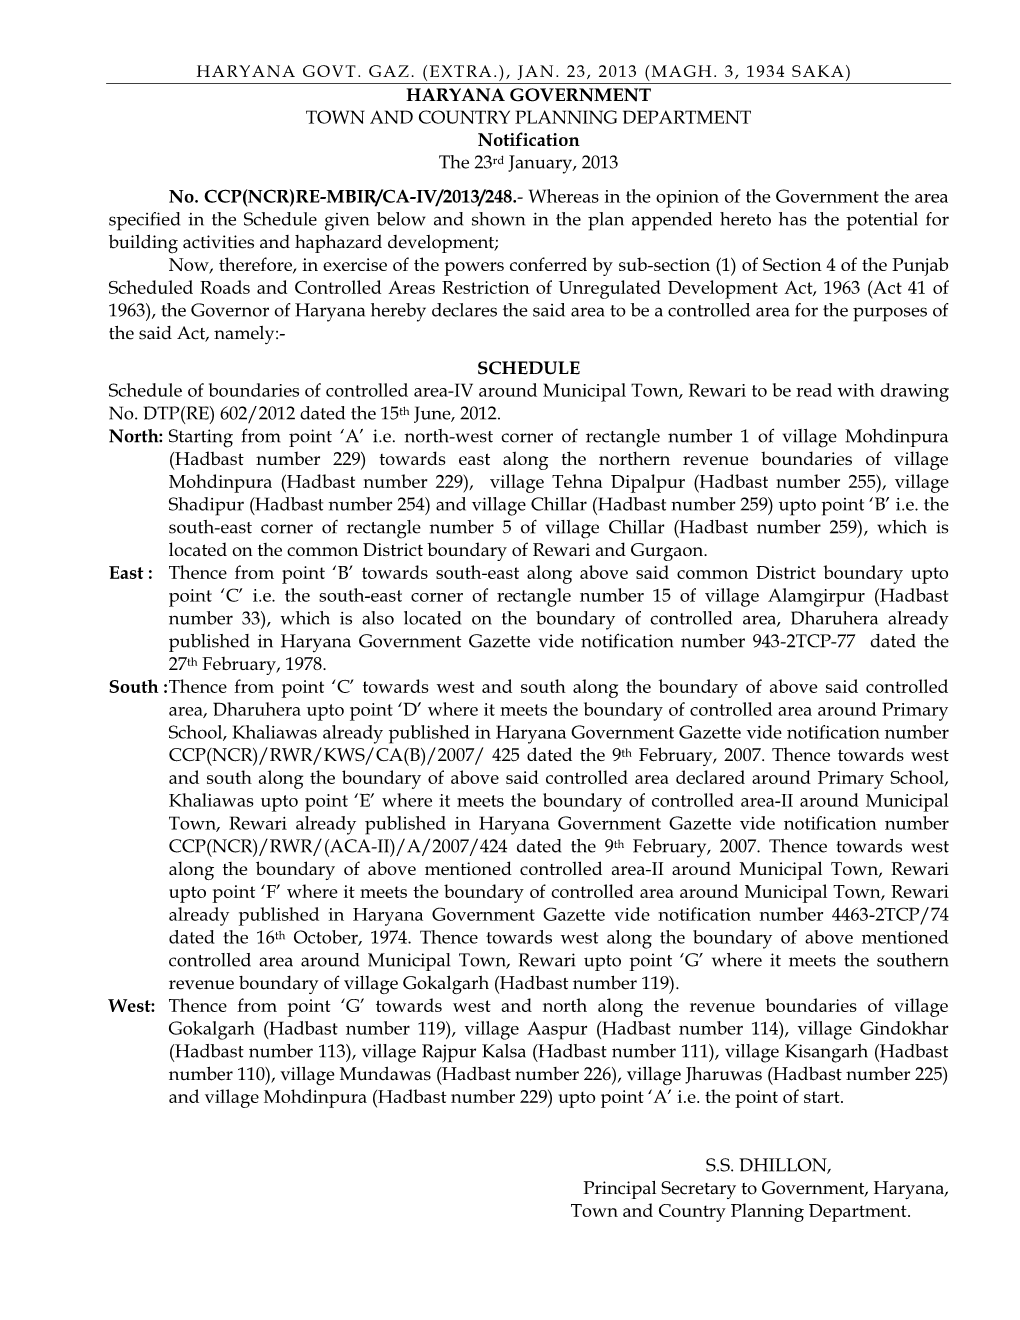 HARYANA GOVERNMENT TOWN and COUNTRY PLANNING DEPARTMENT Notification the 23Rd January, 2013 No